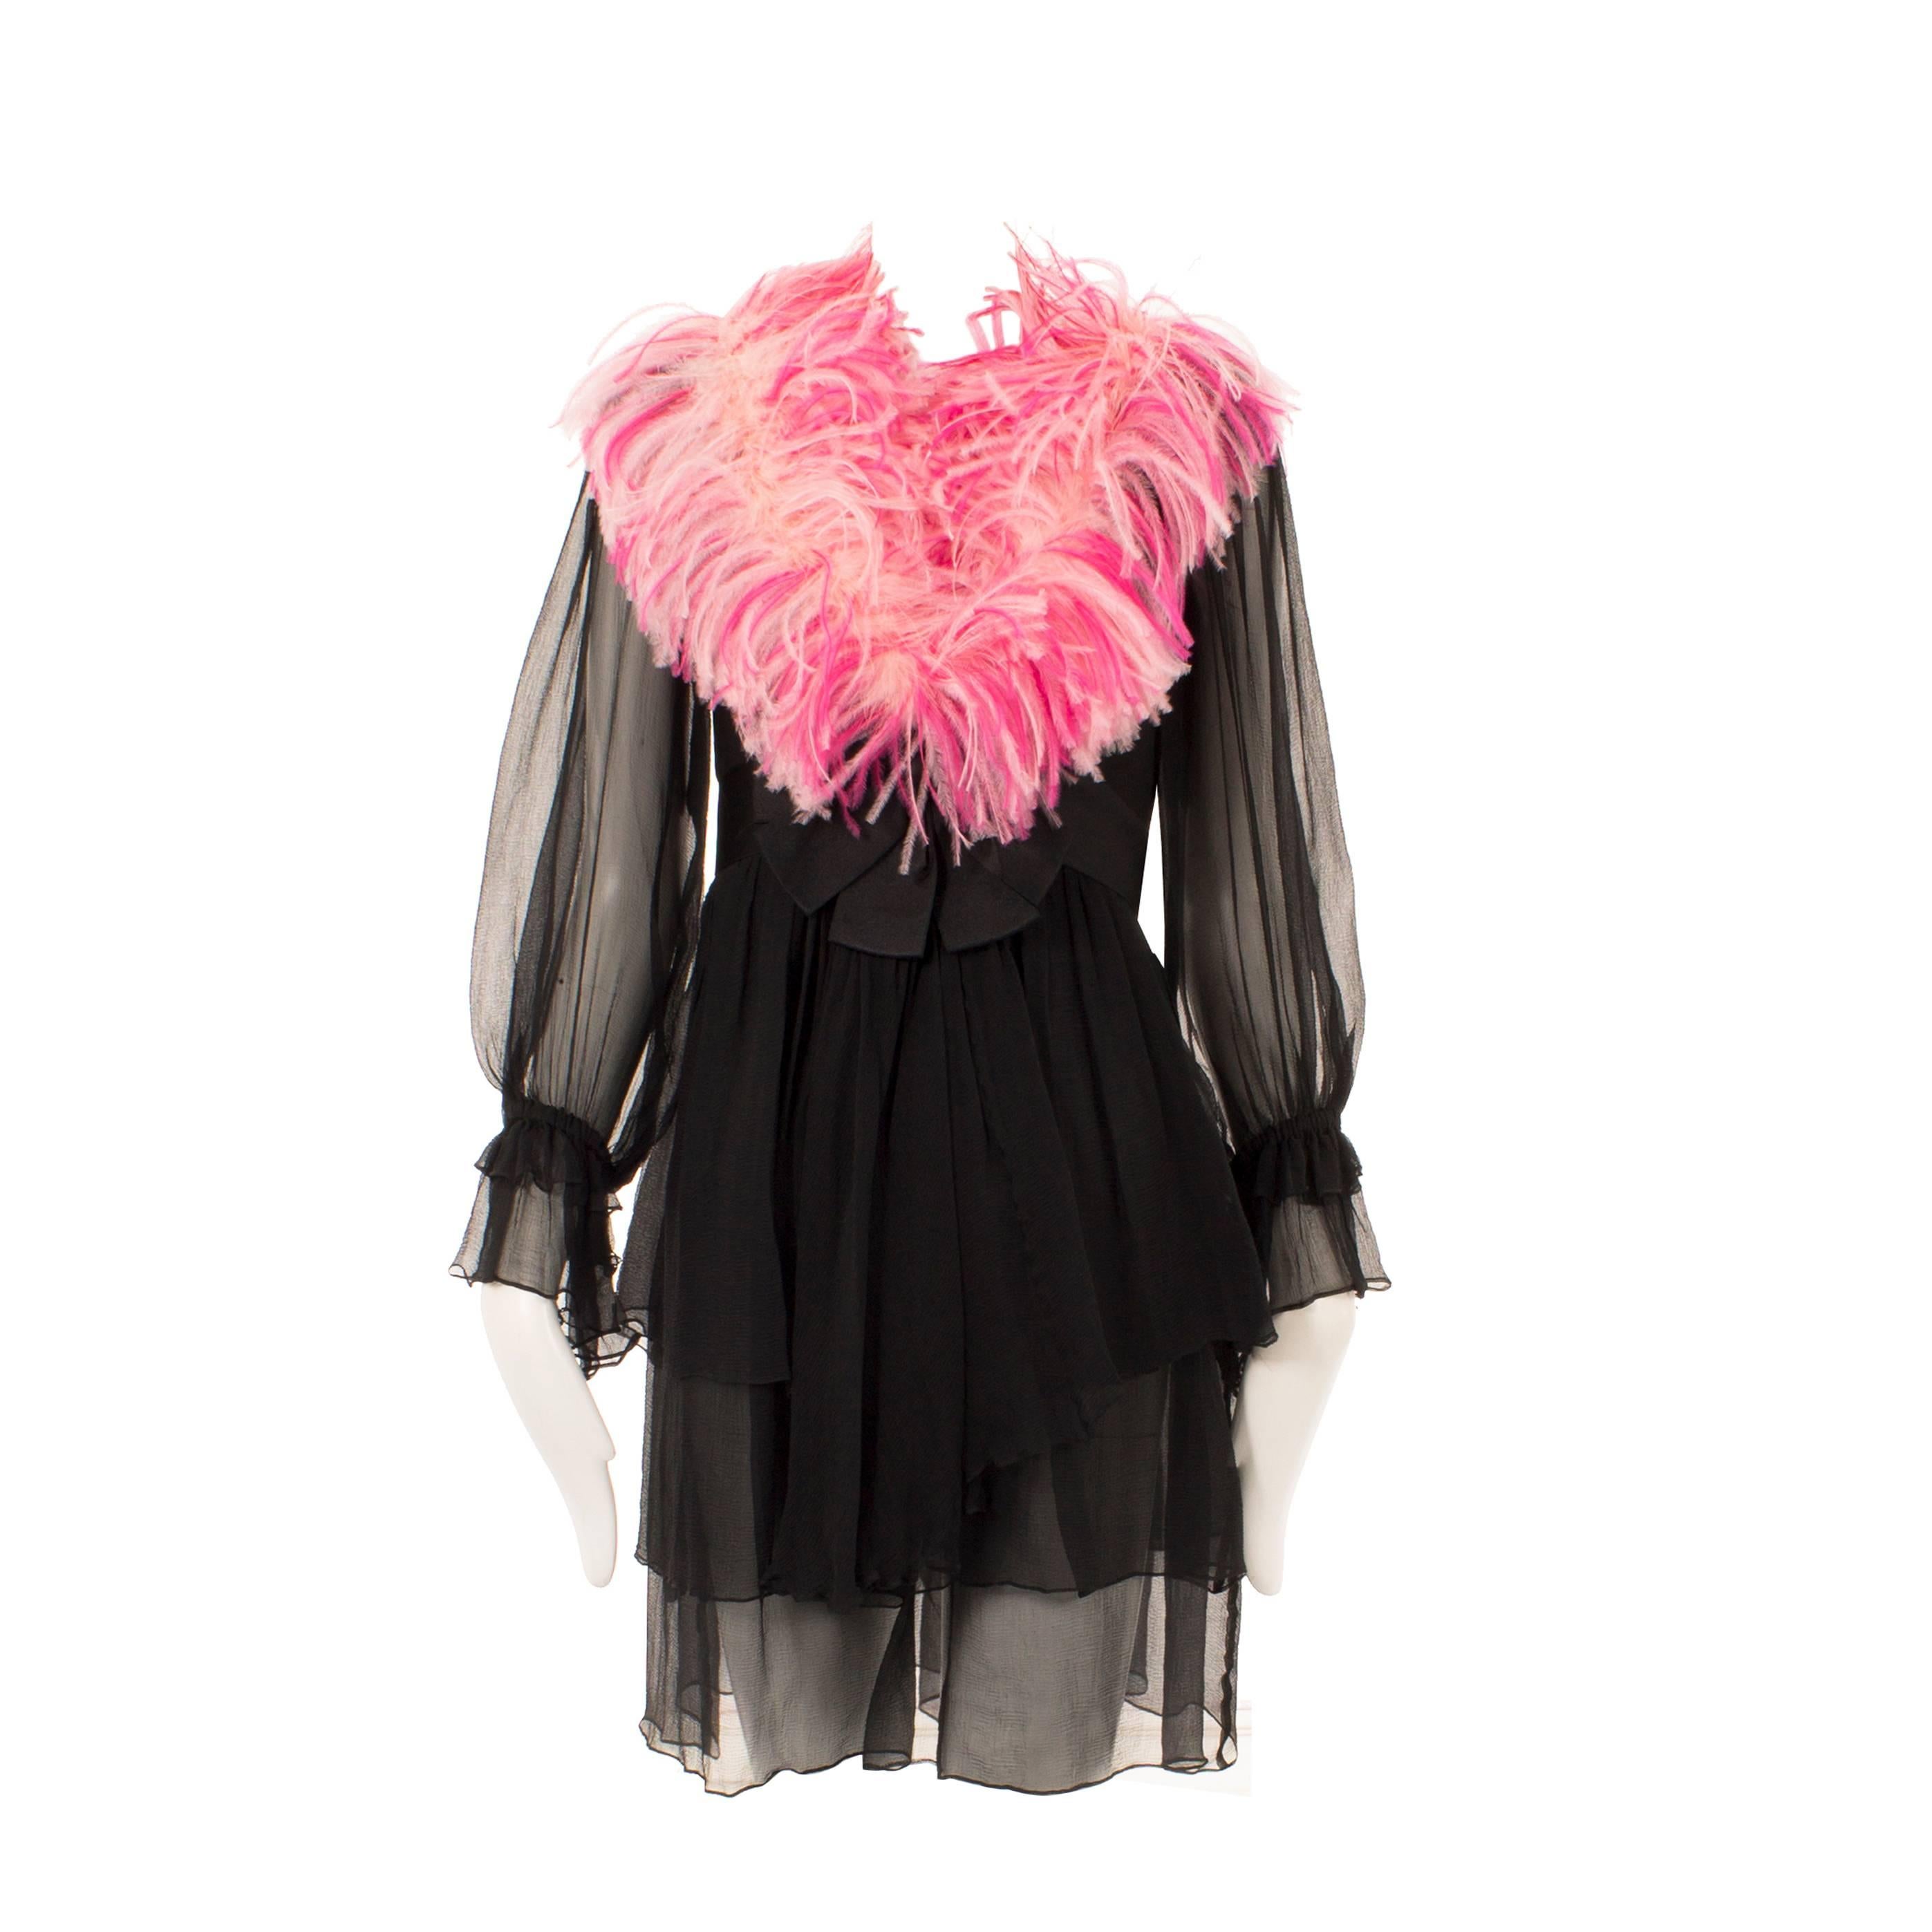 Yves Saint Laurent black chiffon and pink feather dress, circa 1987 For Sale